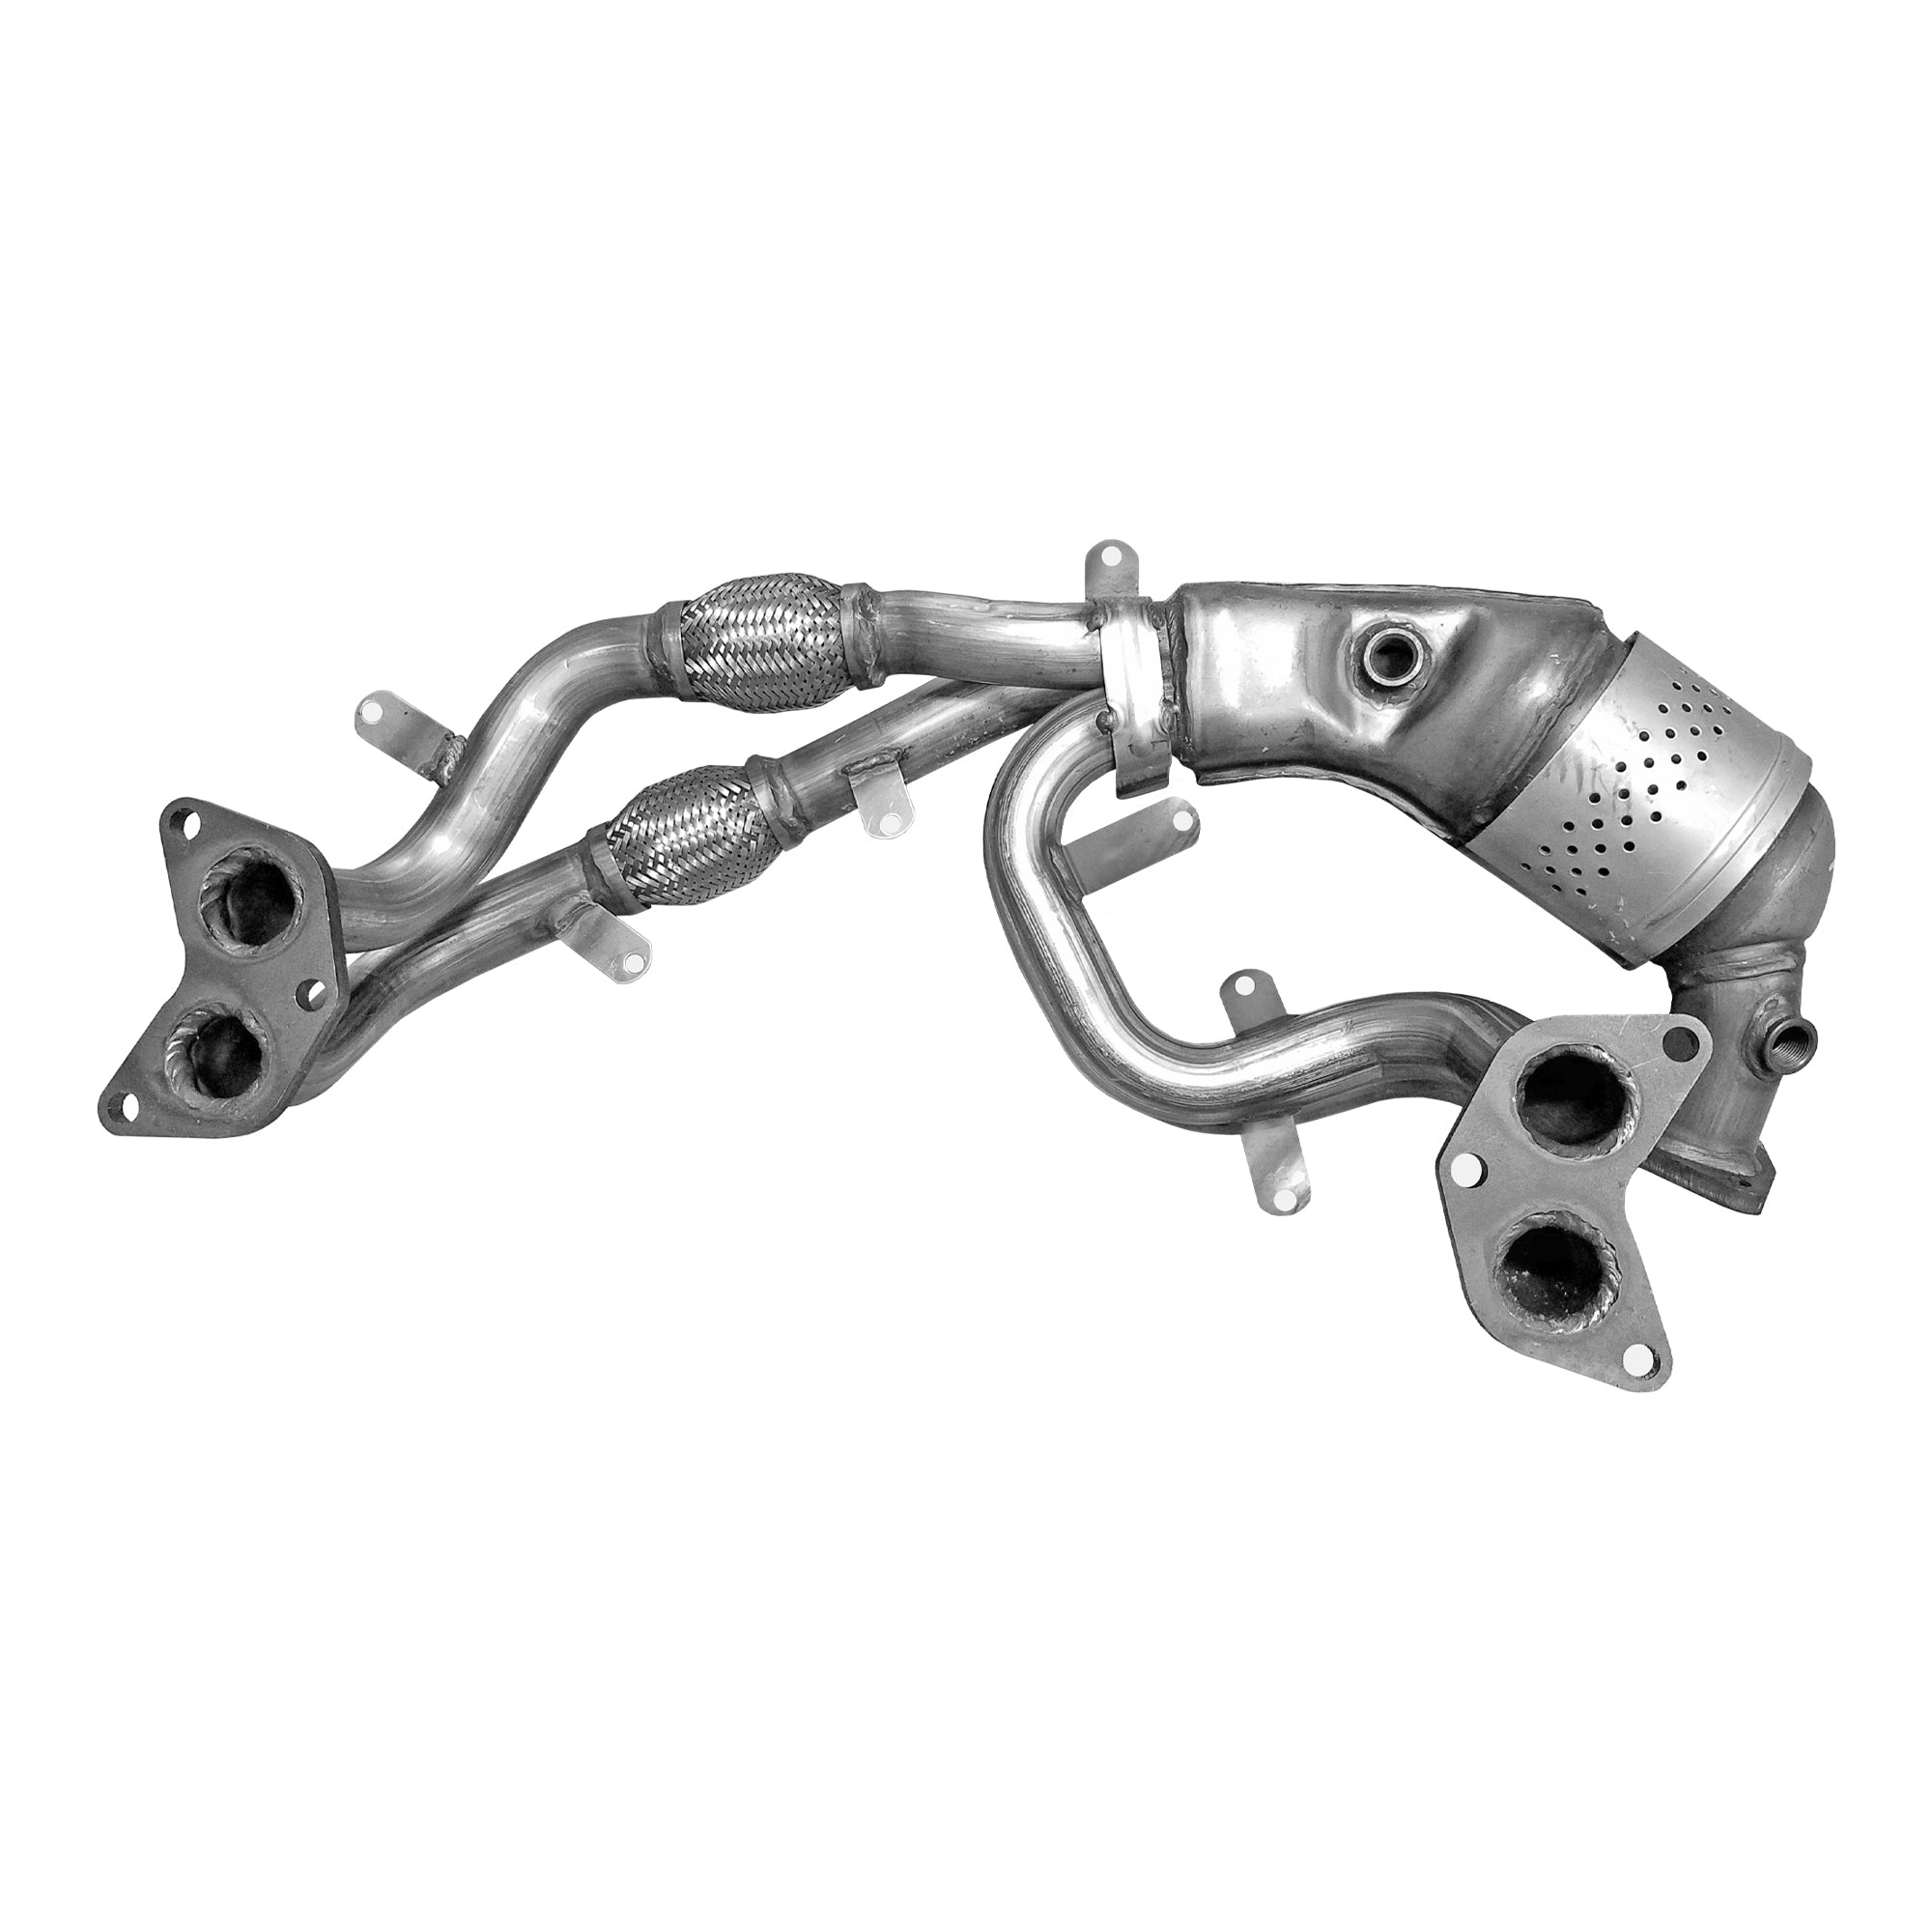 Direct Fit Catalytic Converter Bank for PO420 Forester Impreza Legac –  Bear River Converters